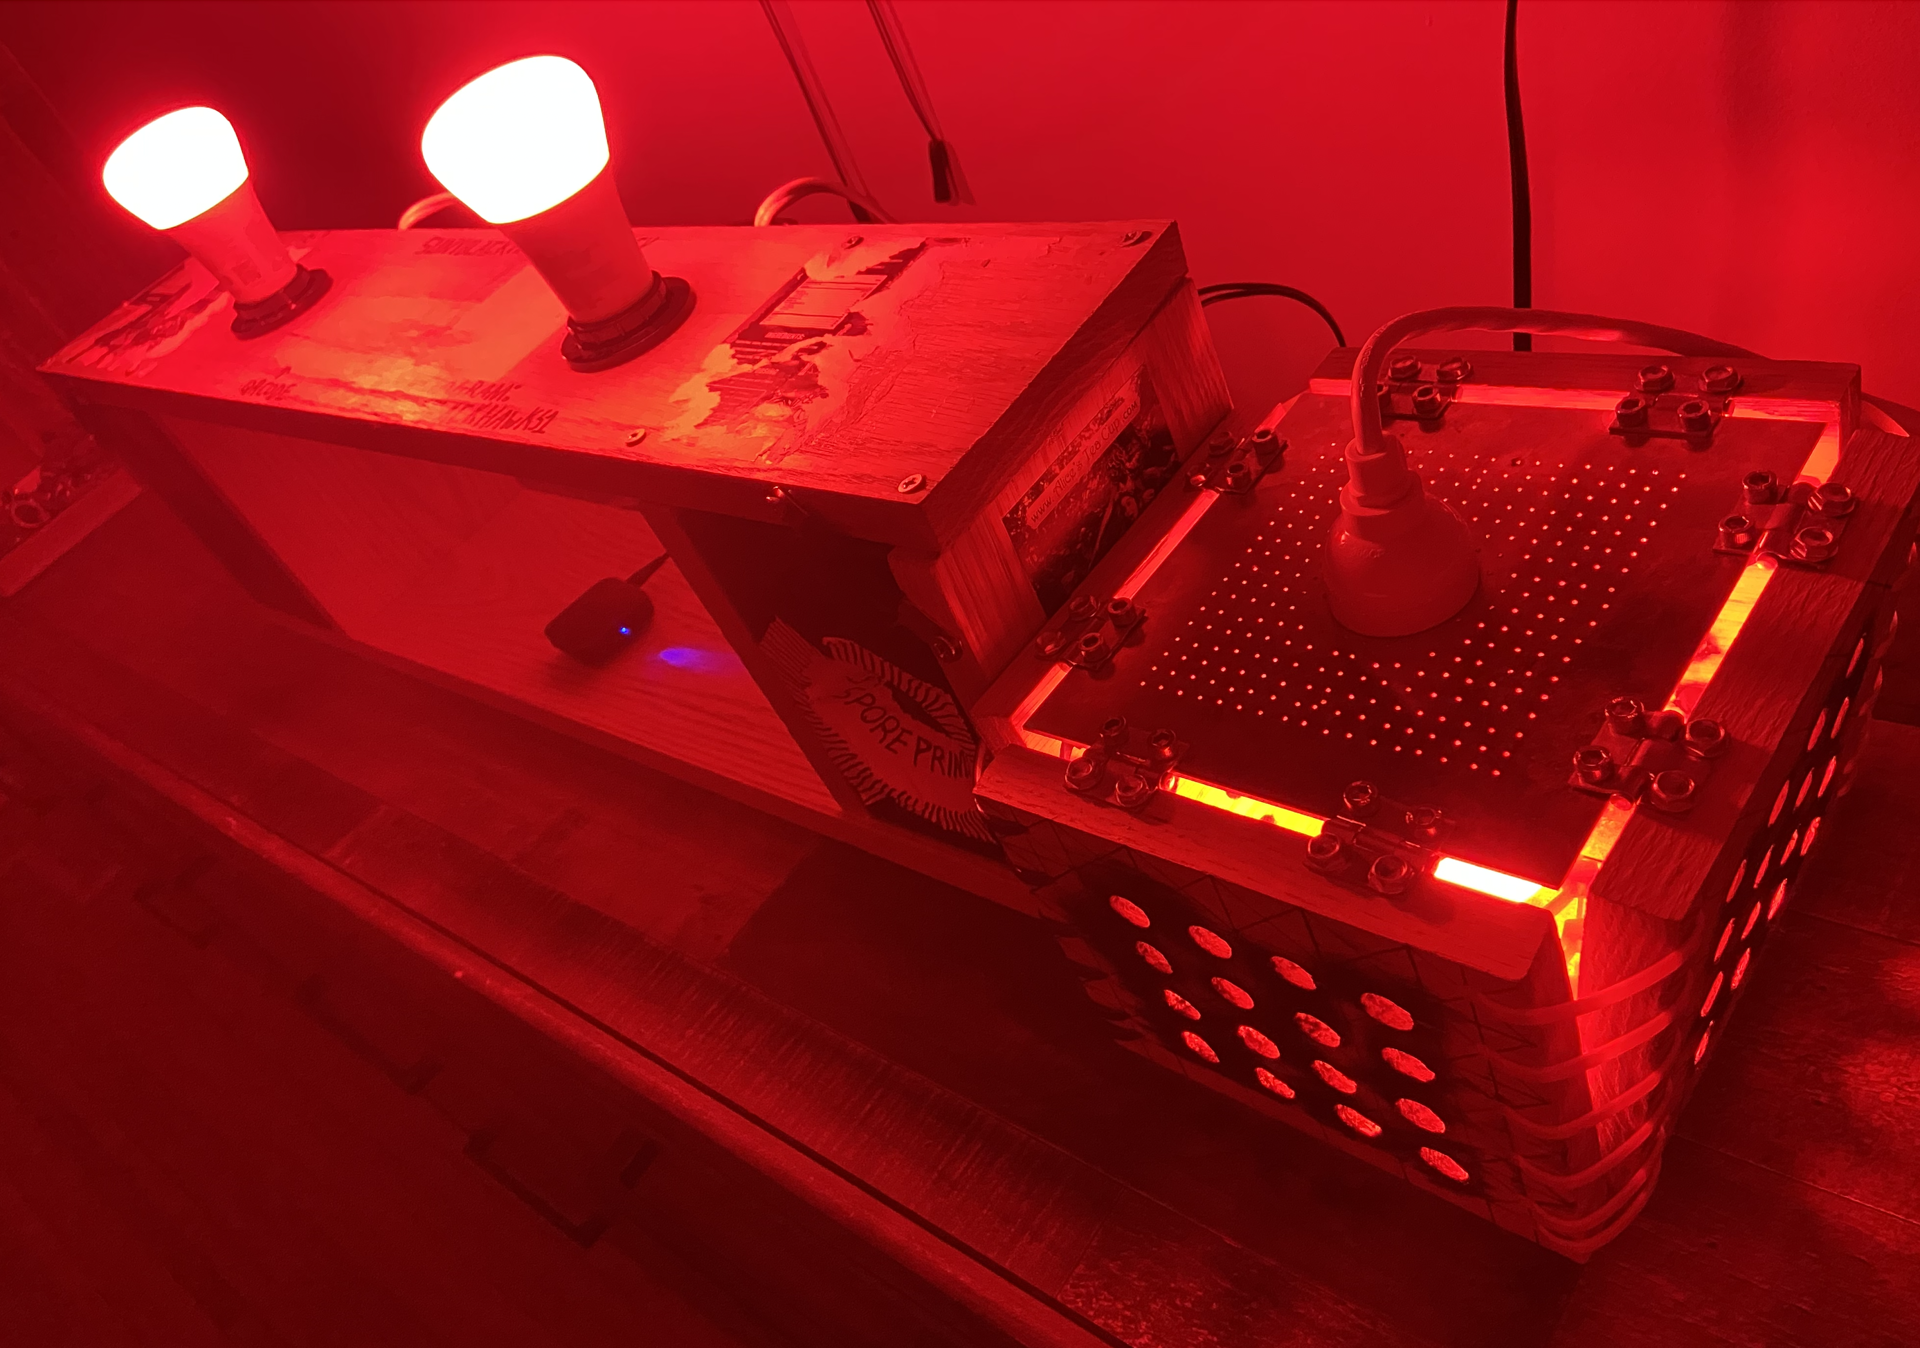 PHILIPS HUE BOOMBOX & DESK LIGHT by Jared Rem